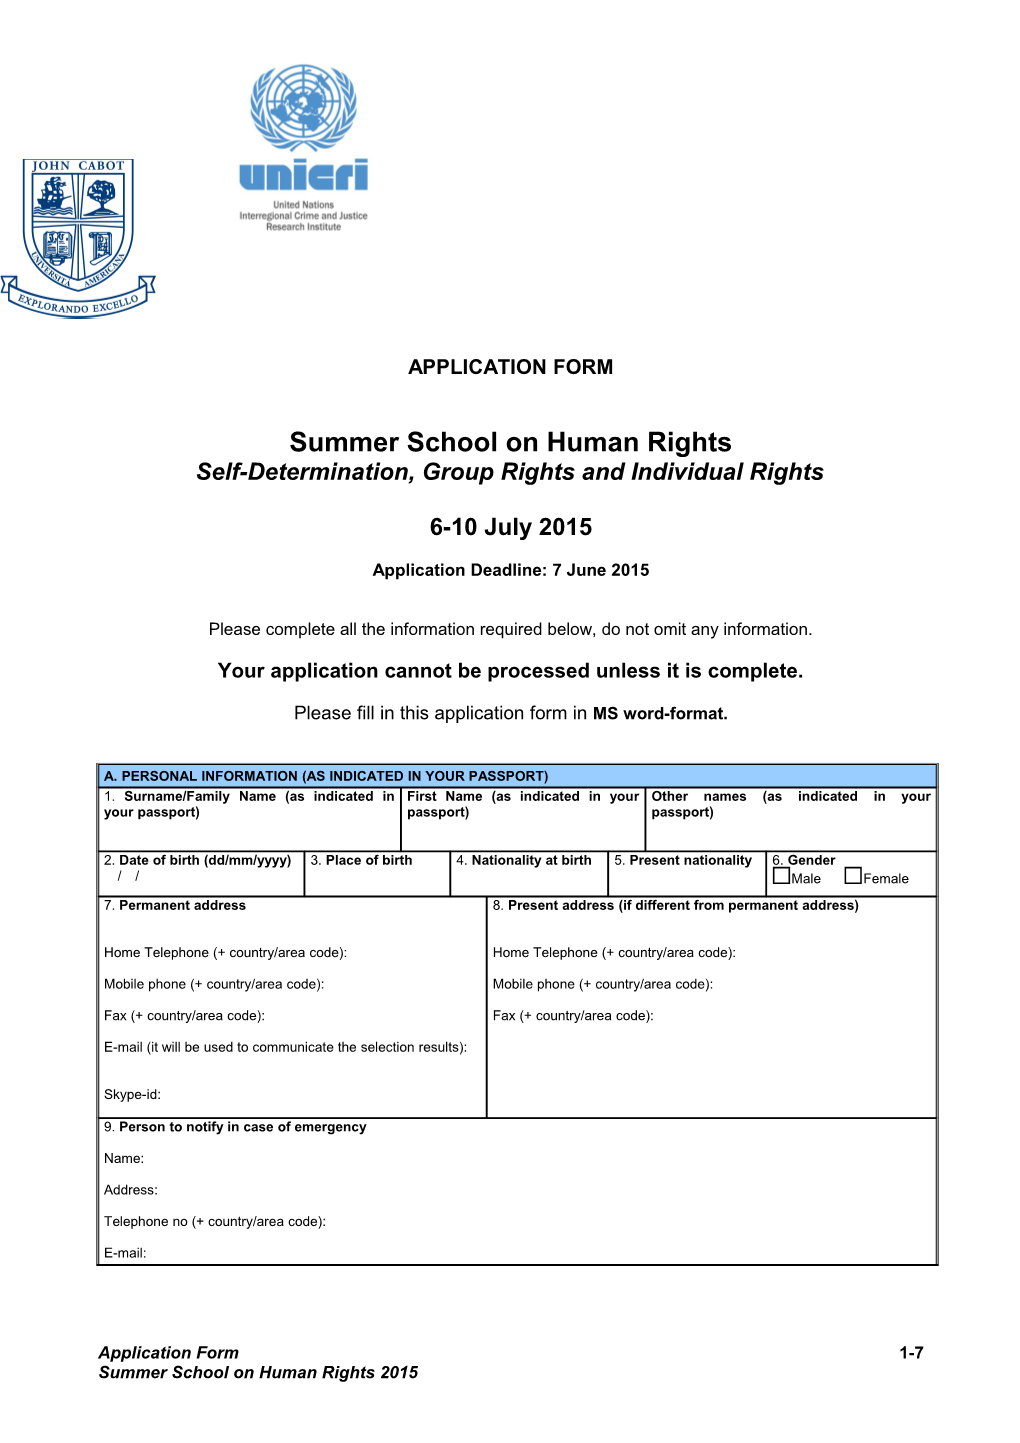 Self-Determination, Group Rights and Individual Rights